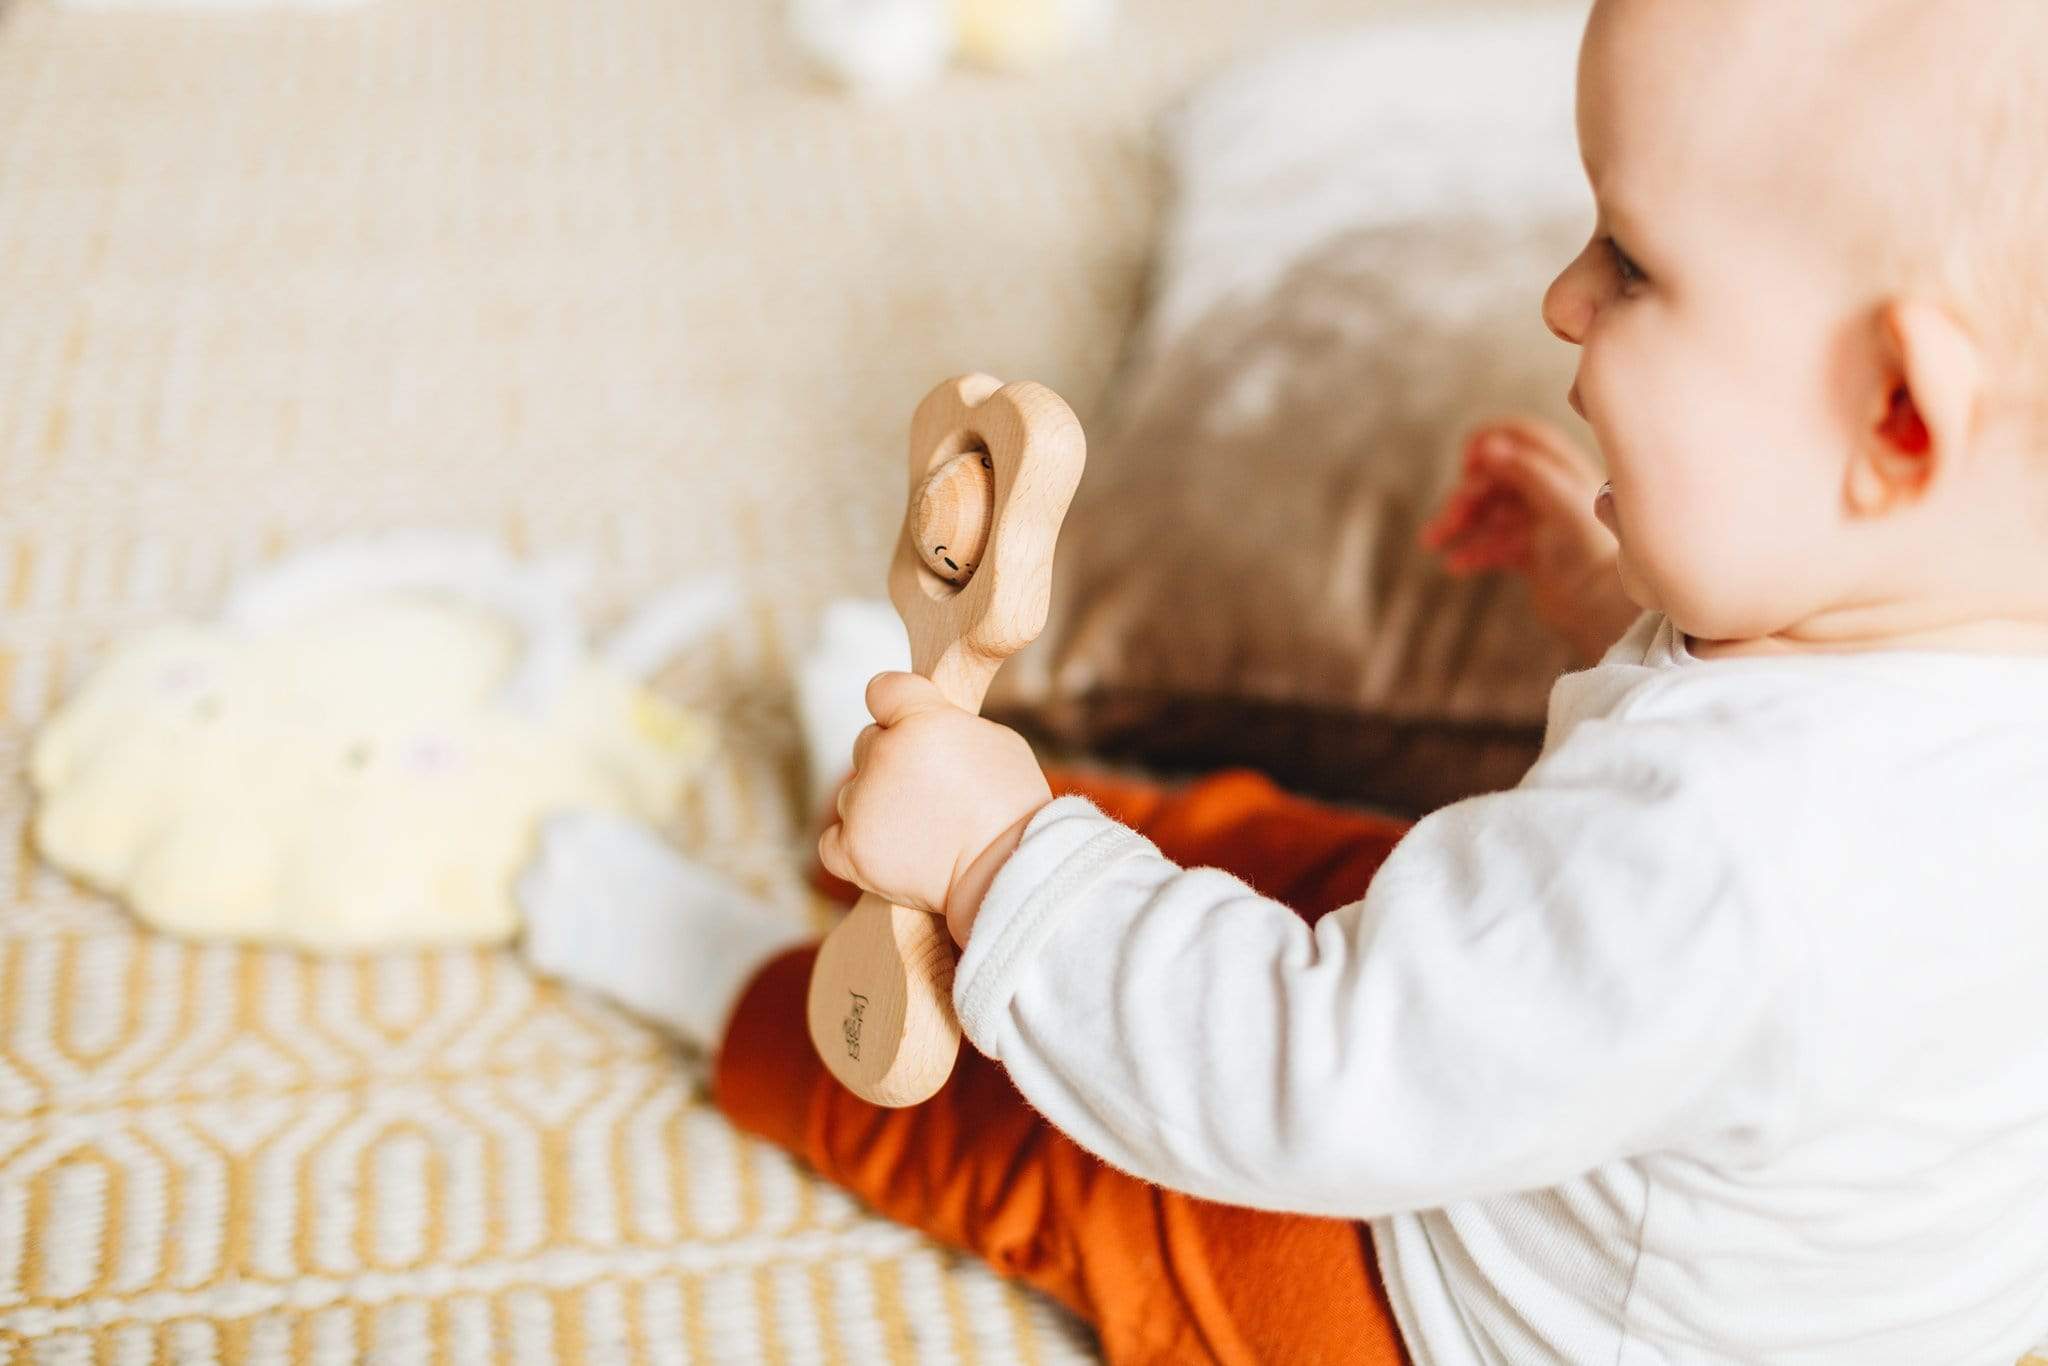 The Kiss Co Baby Accessory Pēpi Kiss - all natural teething rattle